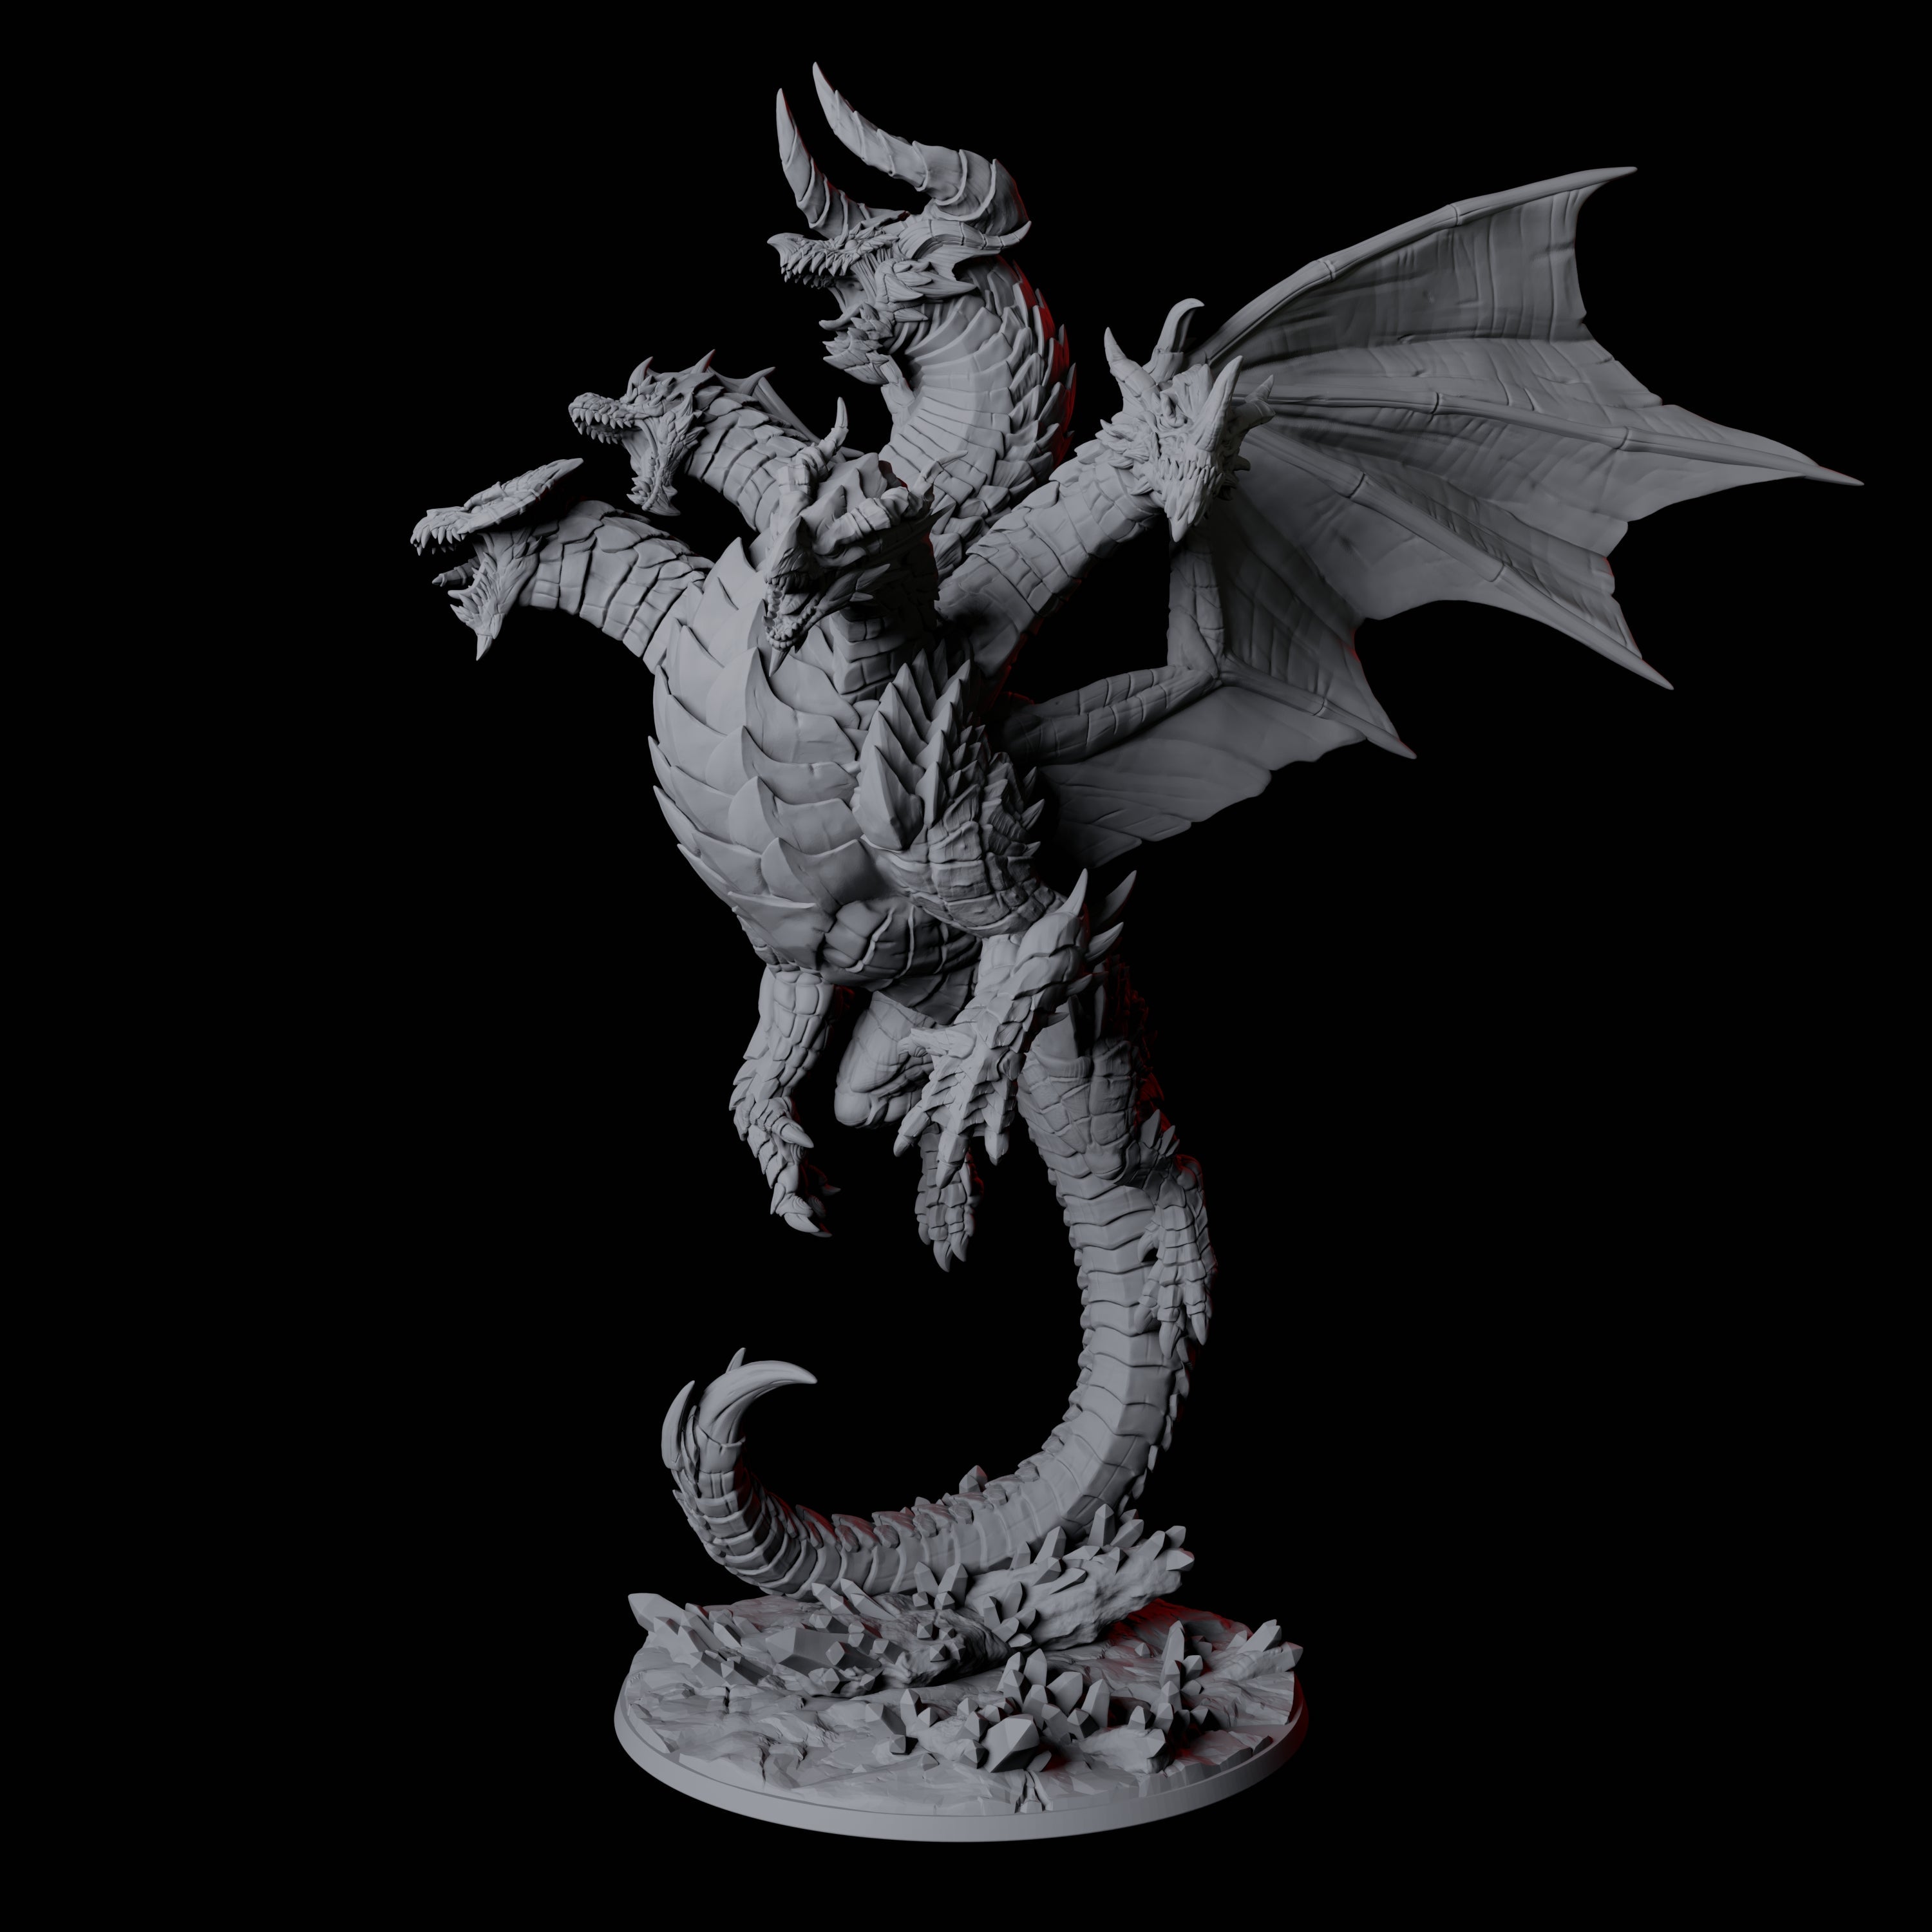 Avatar of Tiamat Miniature for Dungeons and Dragons, Pathfinder or other TTRPGs